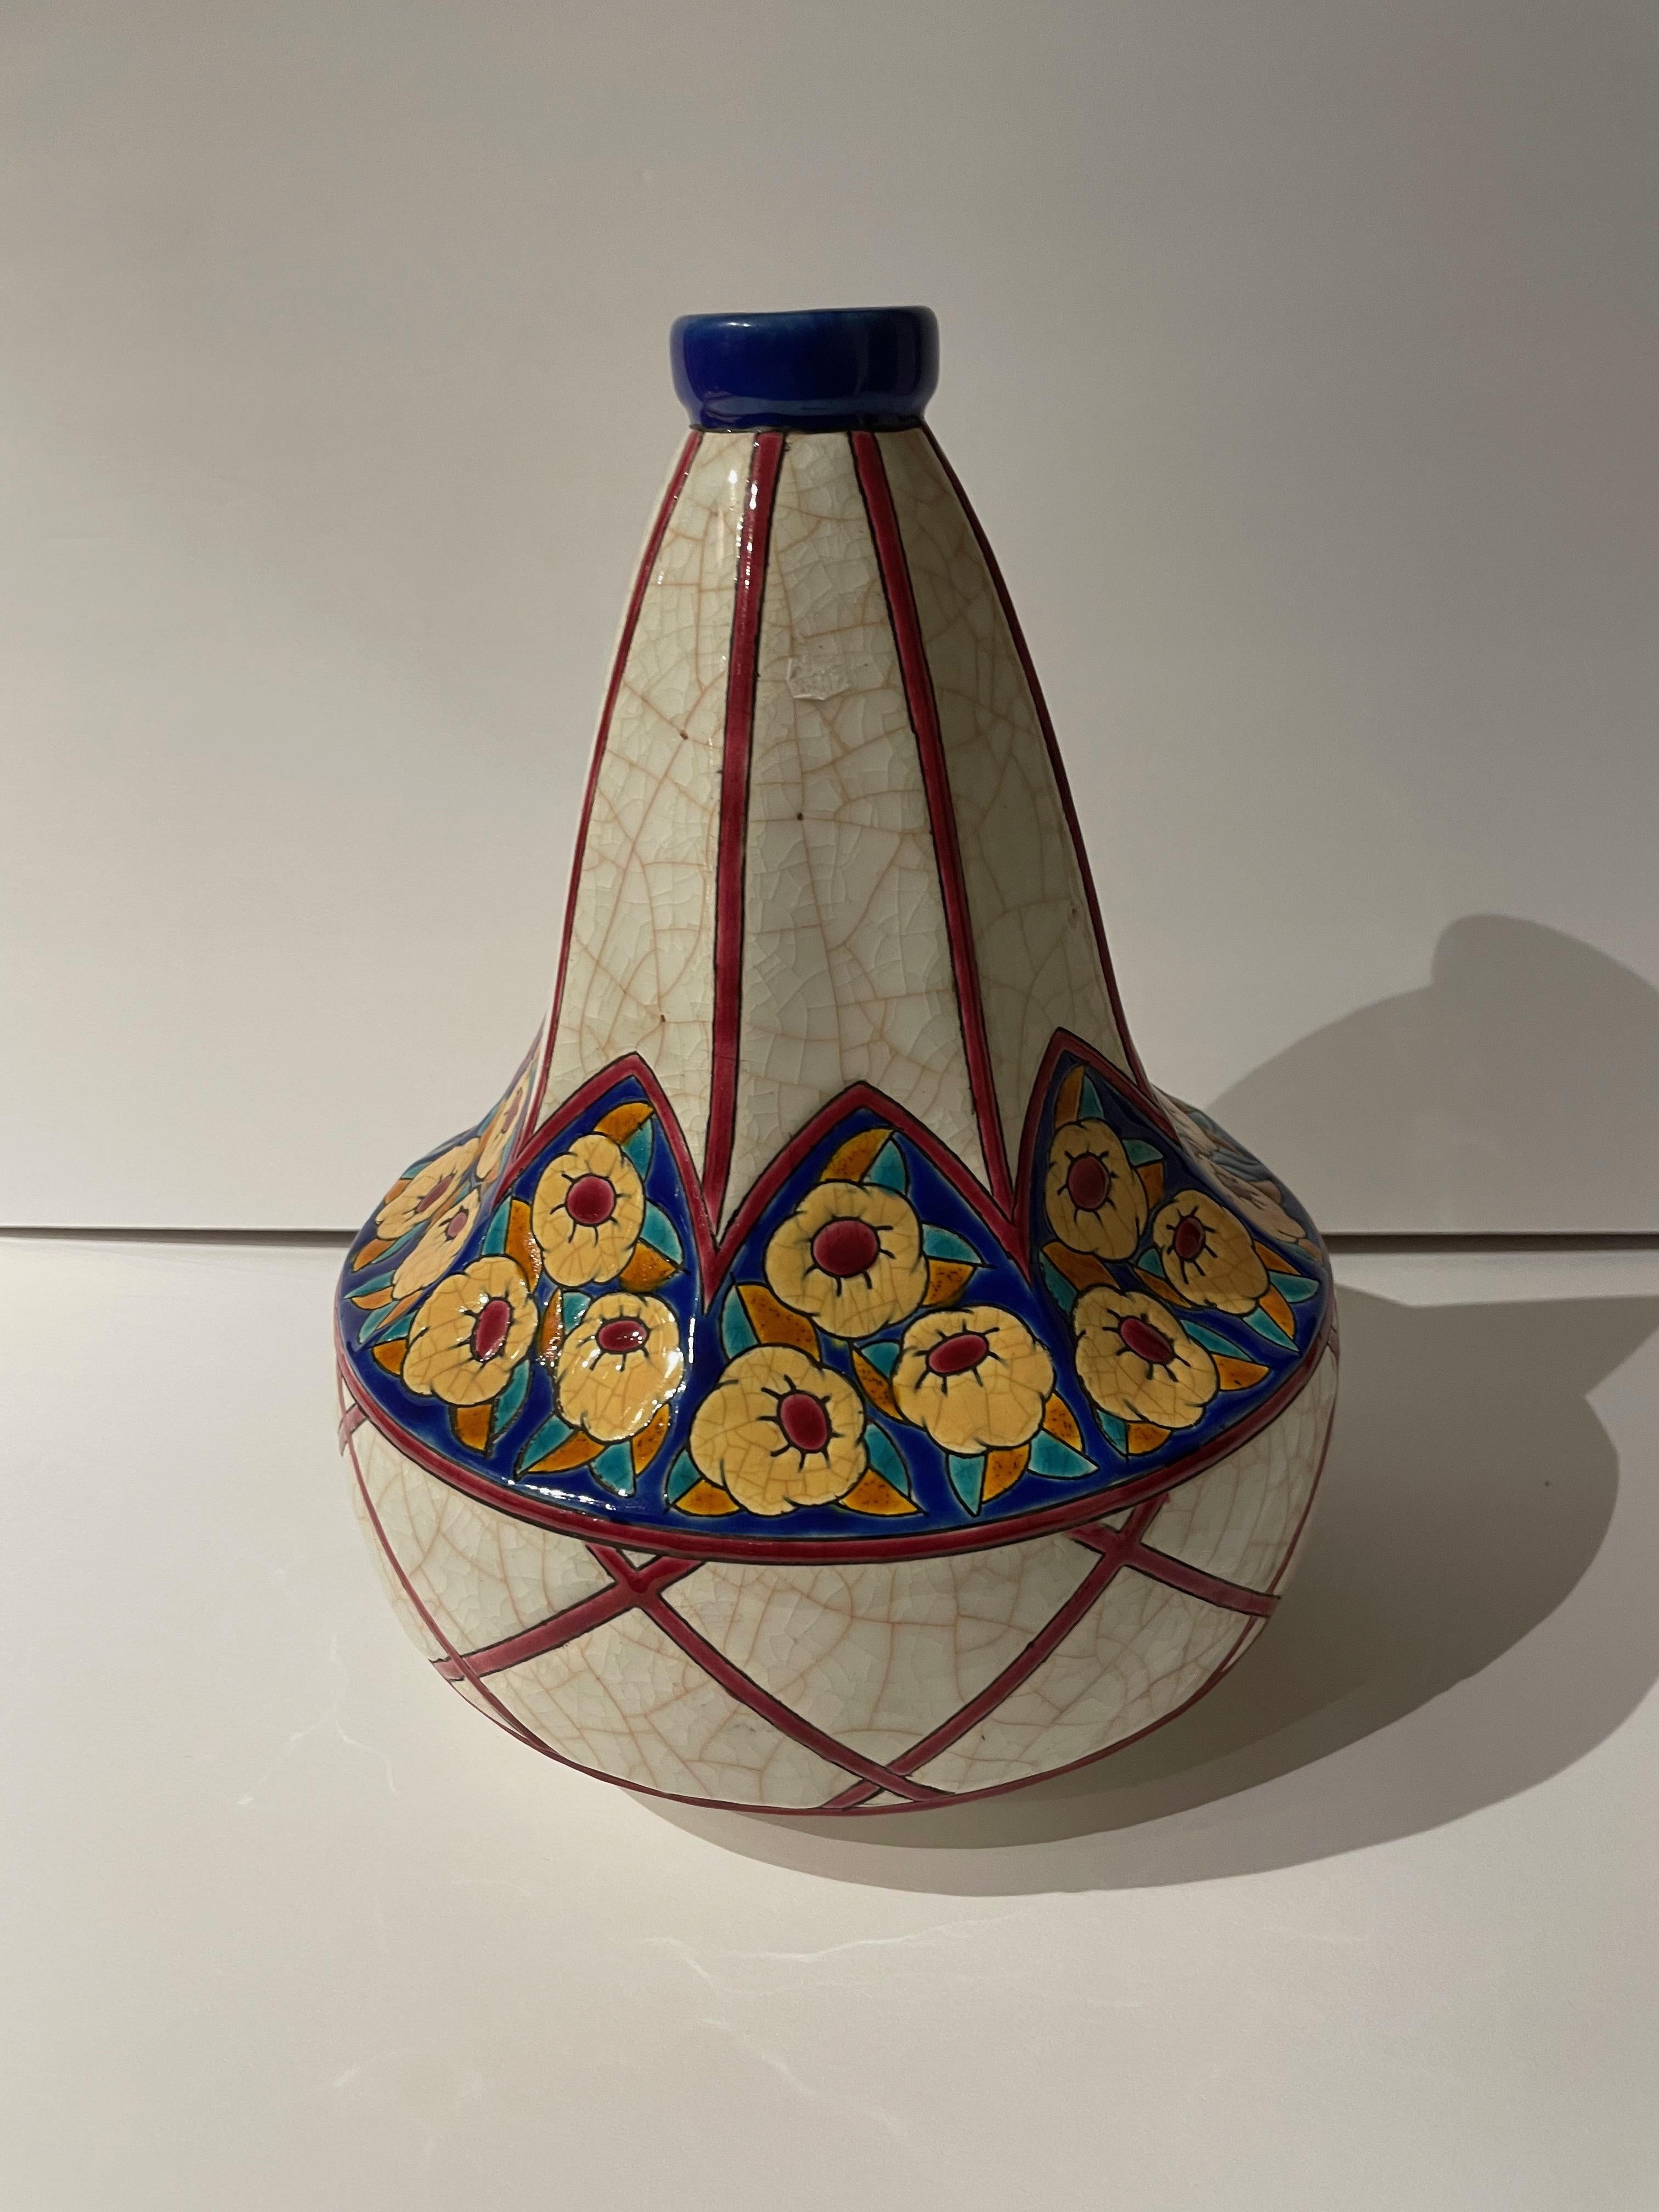 An Art Deco Vase made by Longwy in France with the technique of Ceramic Cloisonné that gives an extra dimension to the design by carving heavy lines into the pattern and filling them with rich enamel color. This is piece is in the iconic pyriform